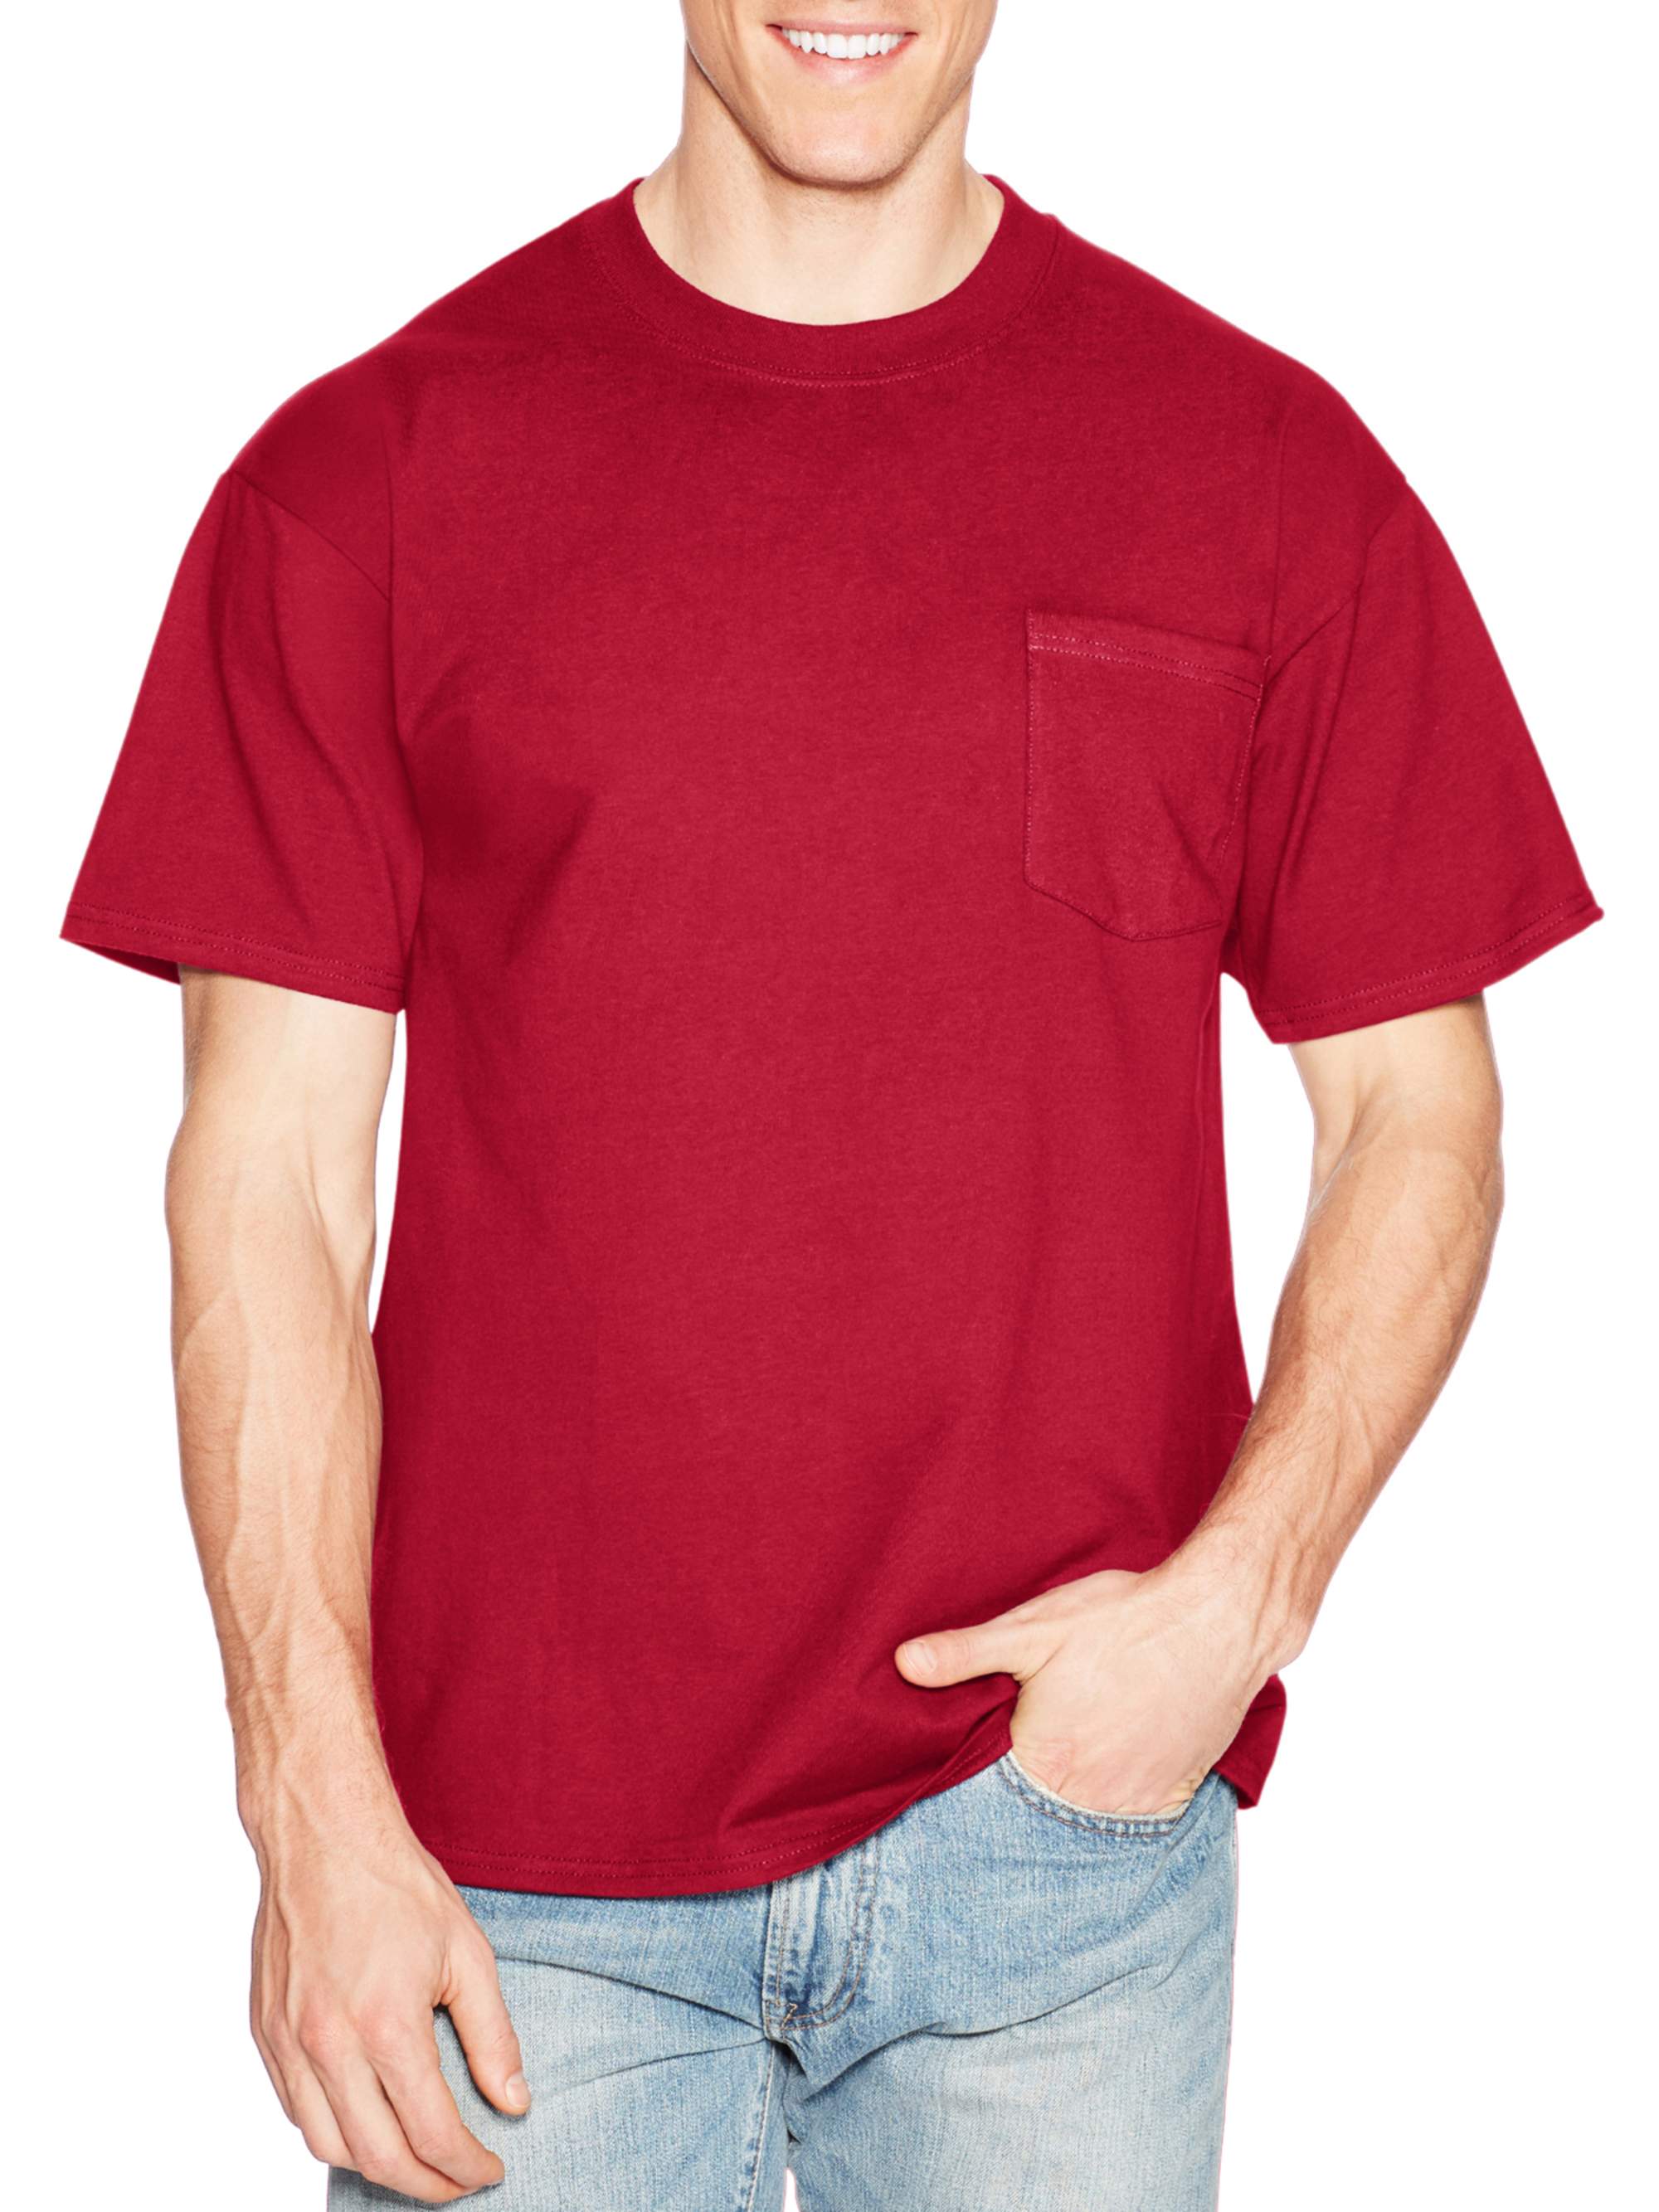 Hanes Men's Premium Beefy-T Short Sleeve T-Shirt With Pocket, Up to Size 3XL - image 1 of 6